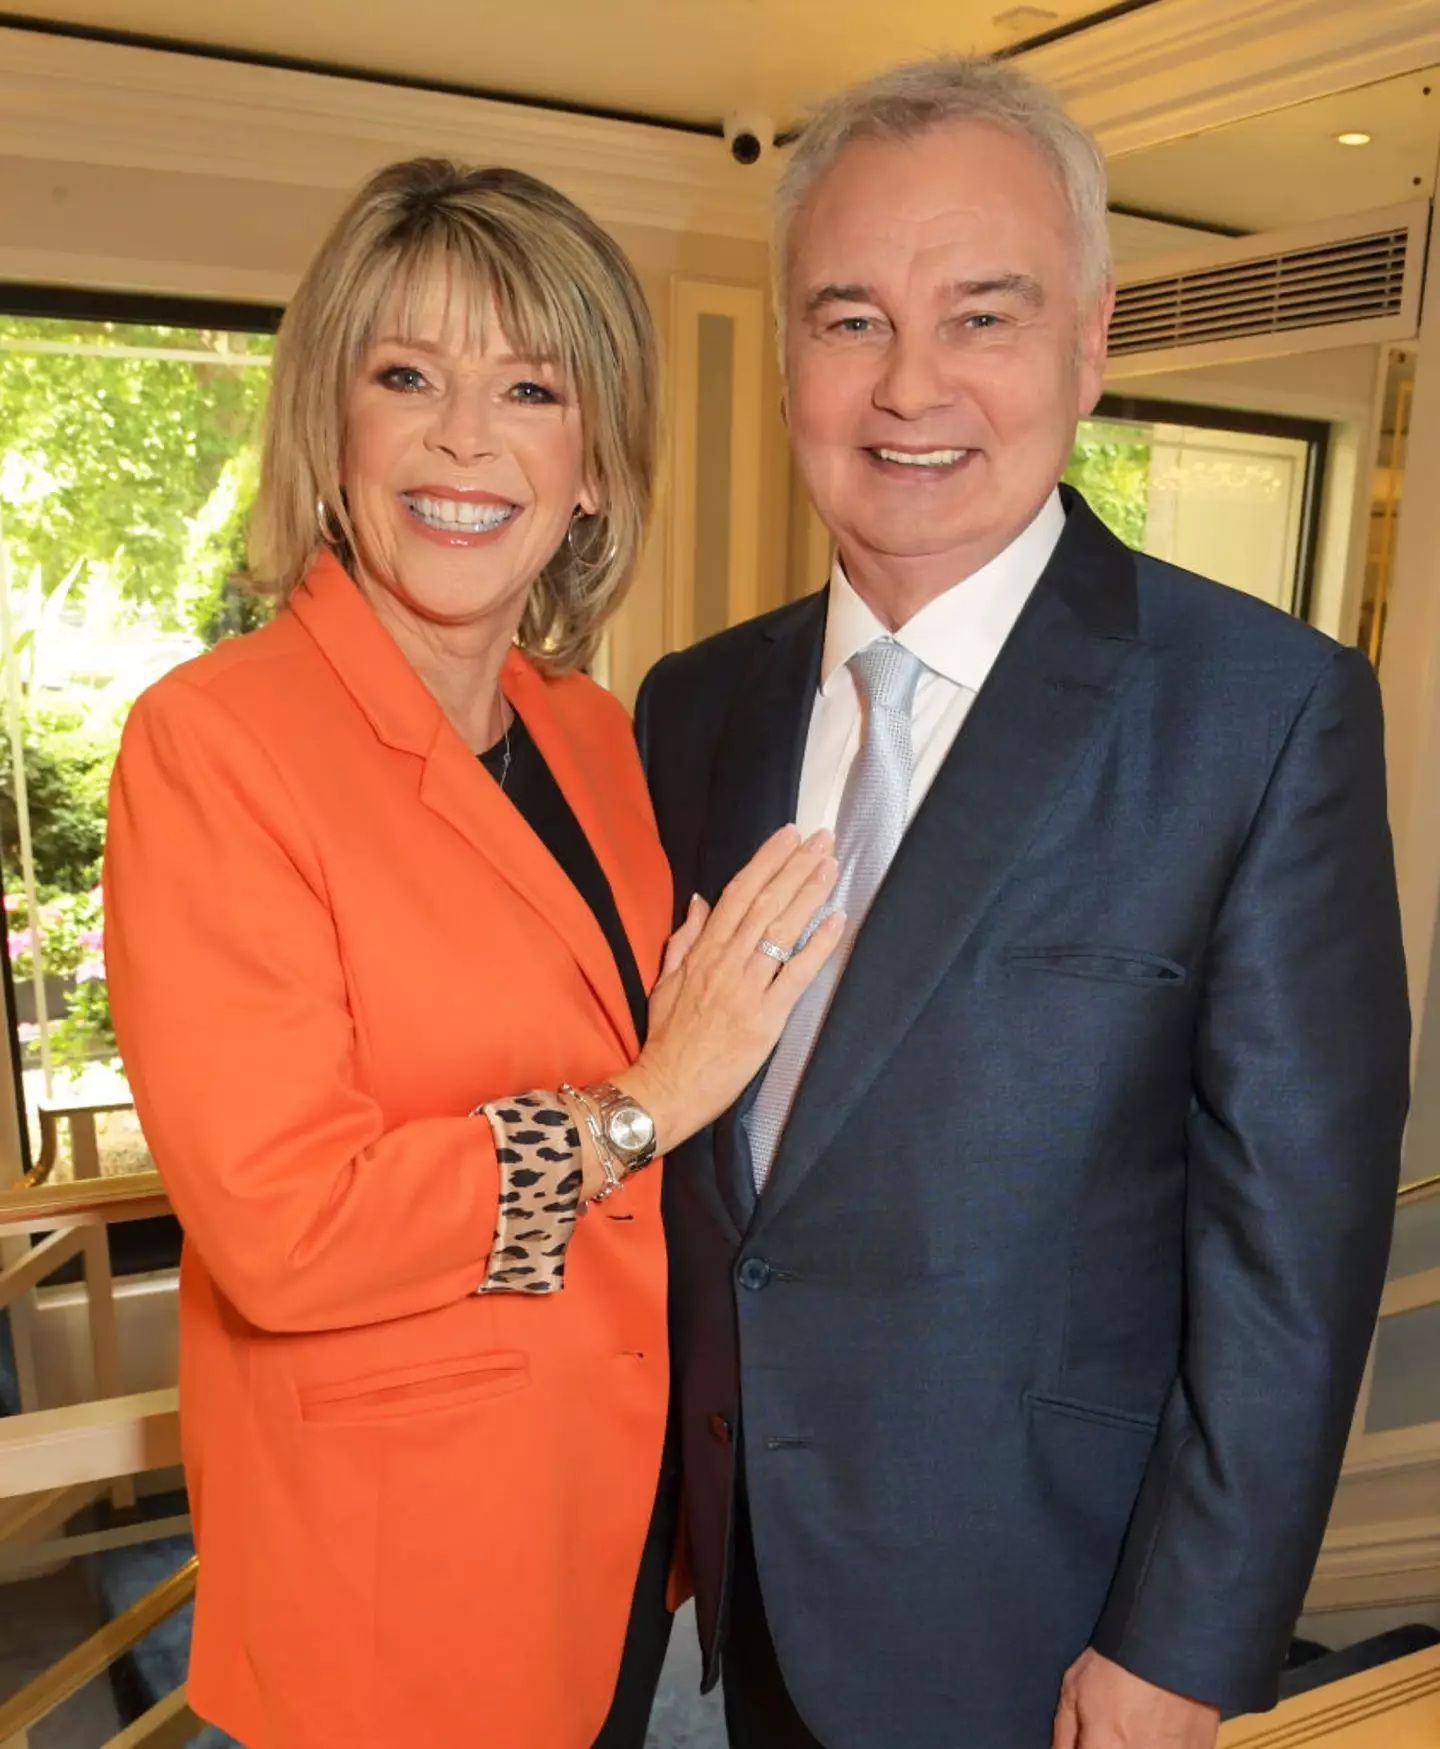 Eamonn and Ruth announced their split back in May. (Dave Benett / Contributor / Getty Images)